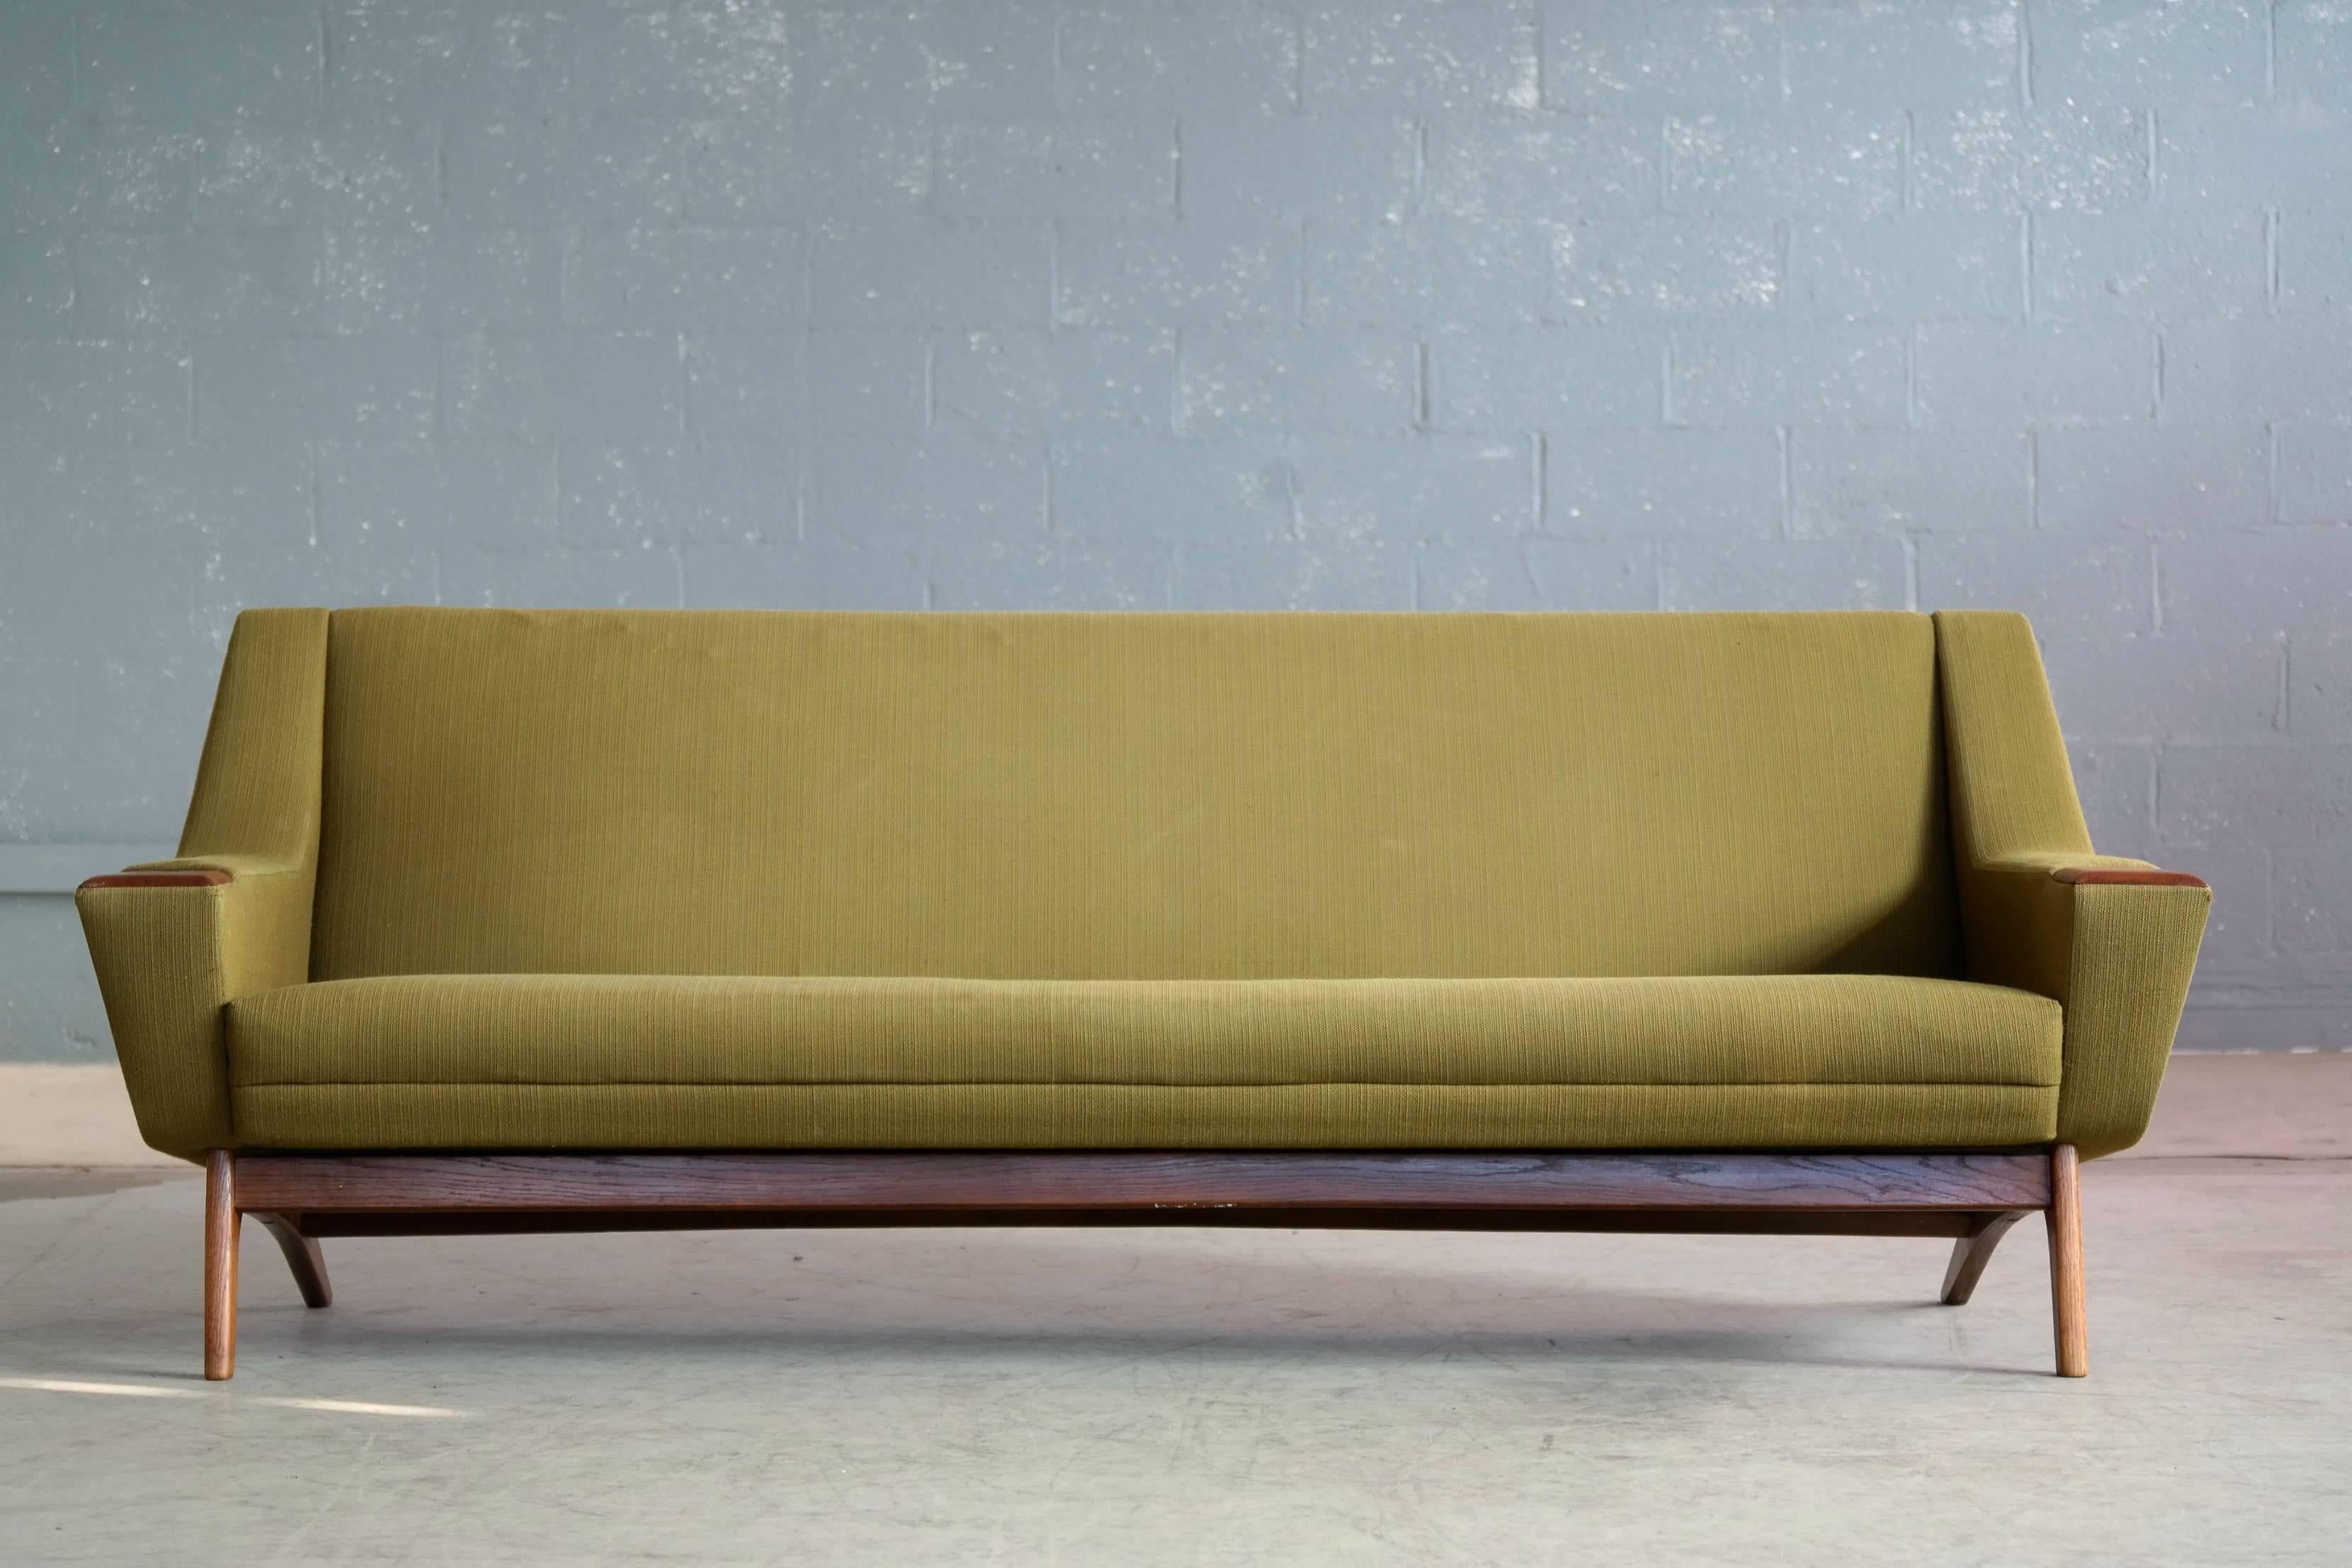 Very elegant and stylish 1960s sofa in the style of Illum Wikkelsø and Leif Hansen for Erhardsen and Erlandsen. Raised on a base and legs of solid teak with large teak accents on the armrests. The base and wood work is in excellent condition while